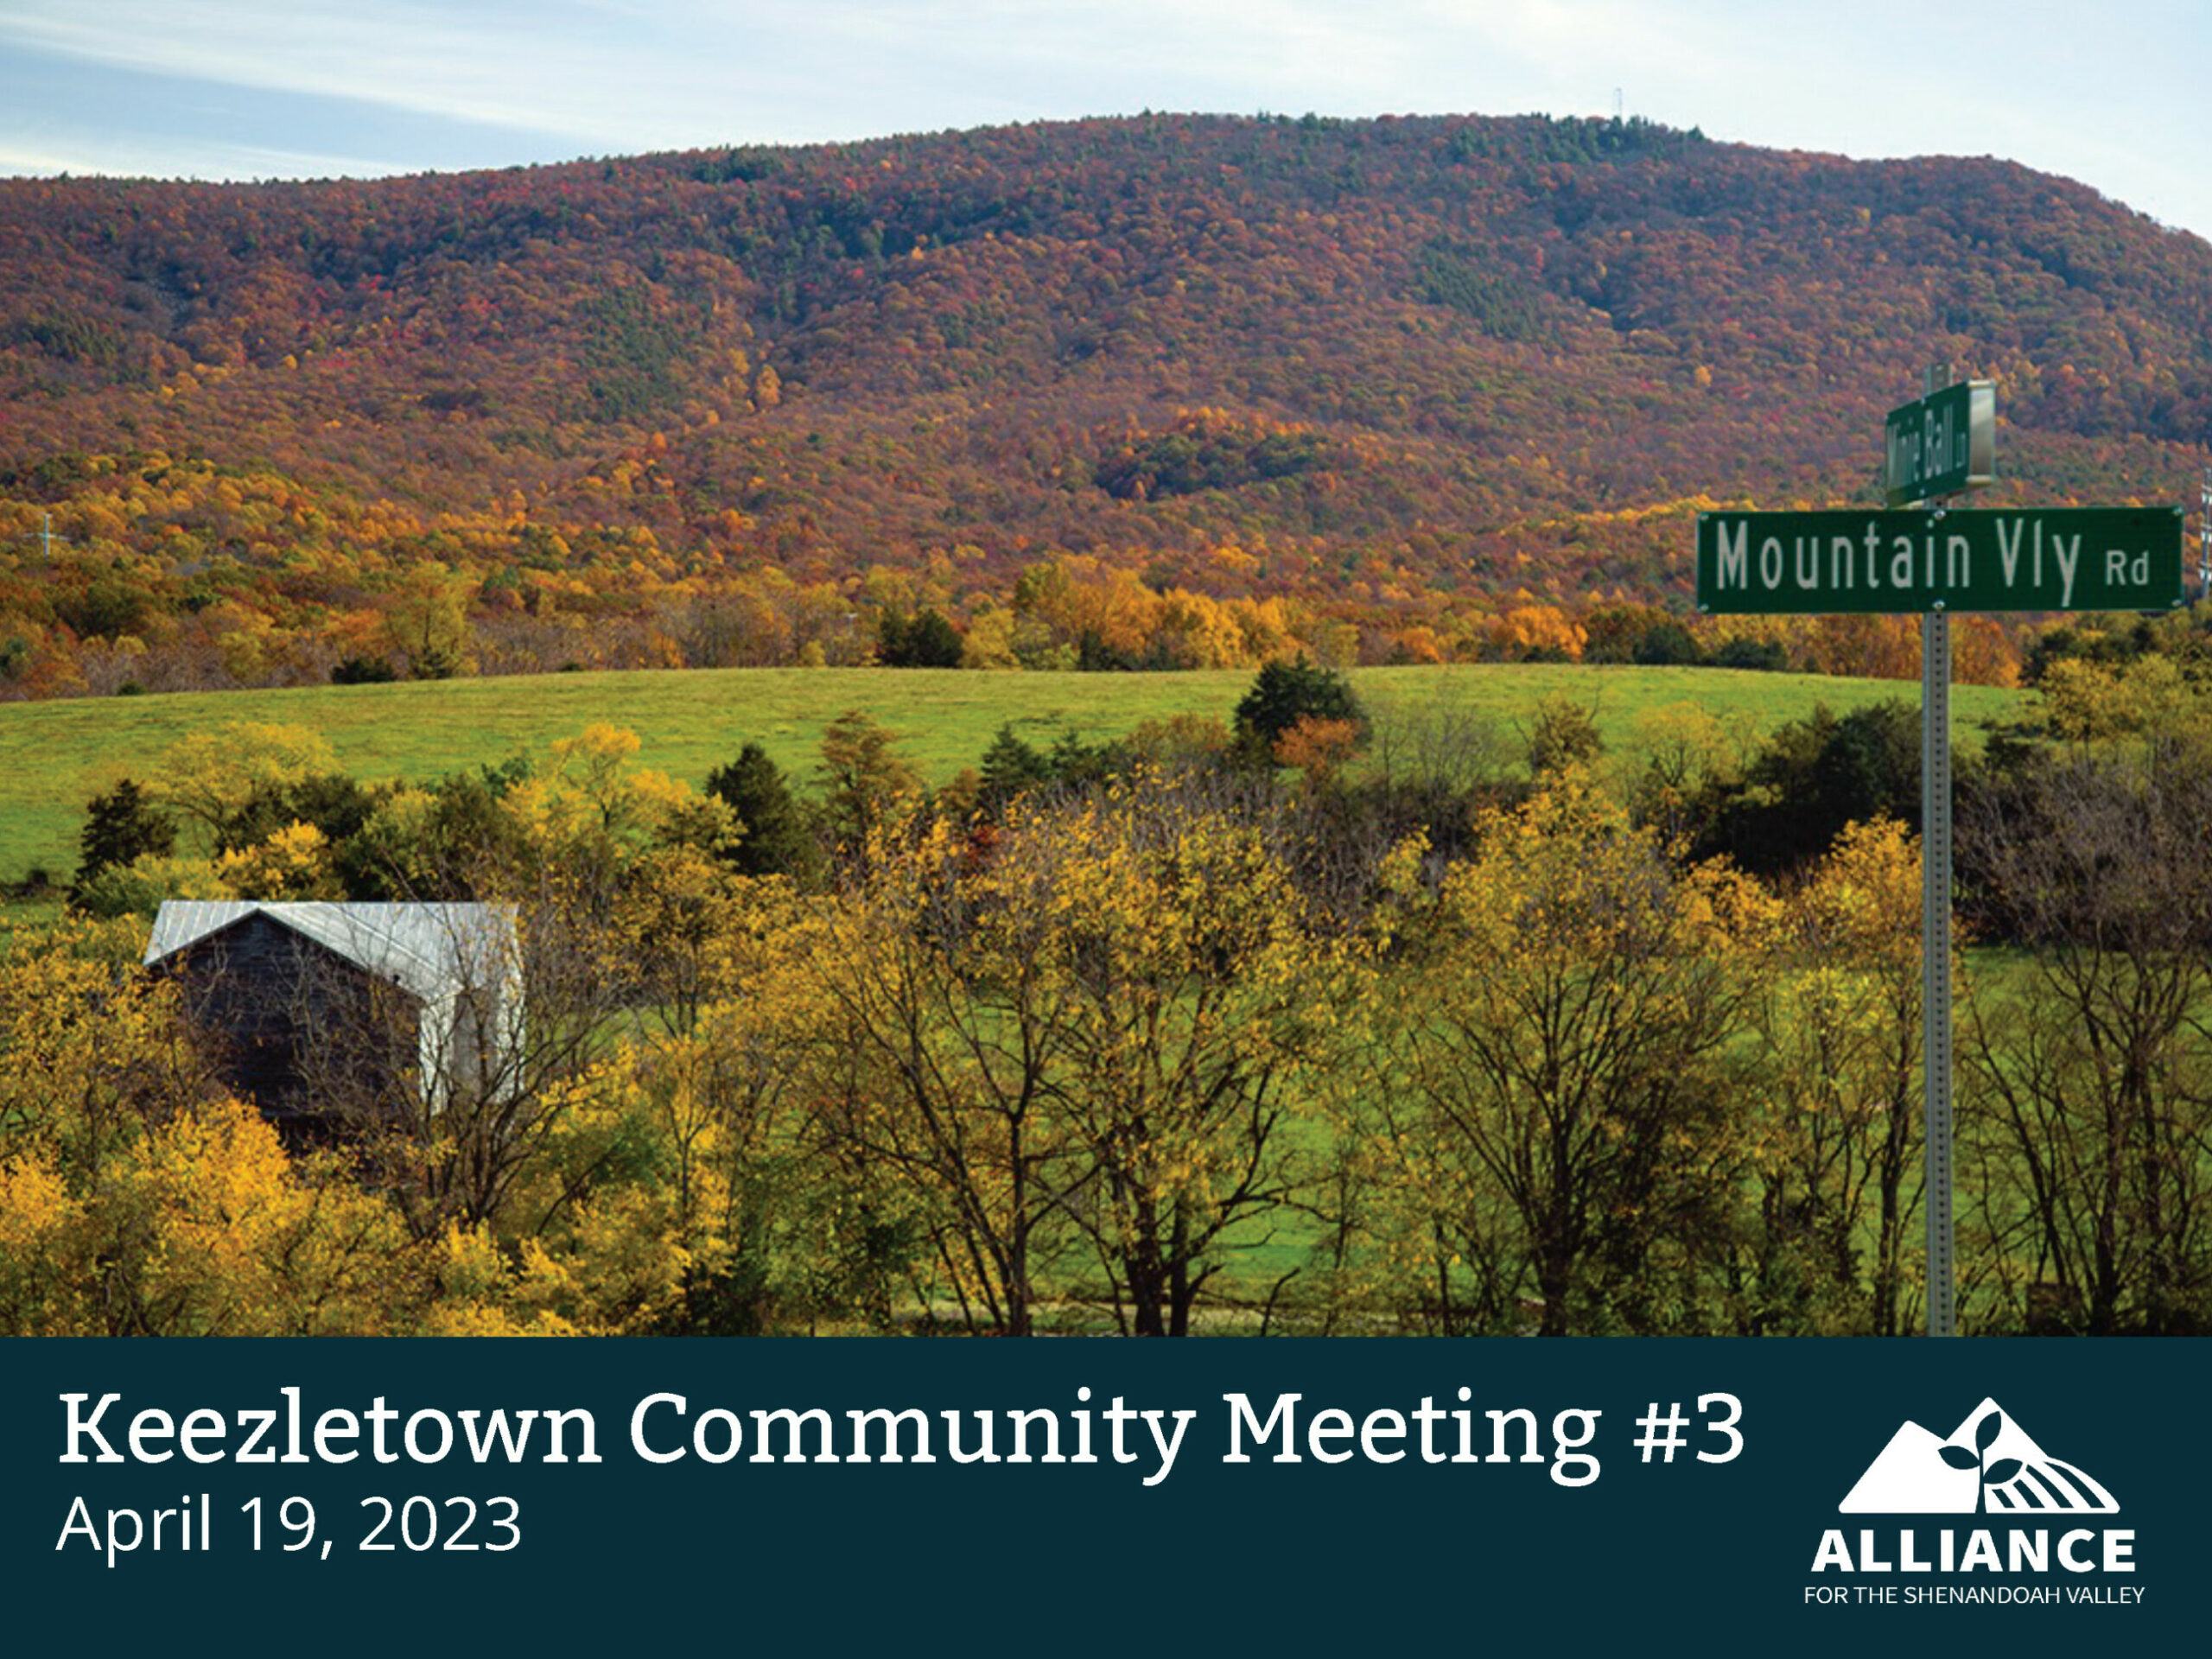 Slideshow cover slide featuring a fall landscape with a mountain range in the background, a green field in the mid ground and a tree-dotted home in the foreground with a road sign indicating the photo was taken from Mountain Valley Road.